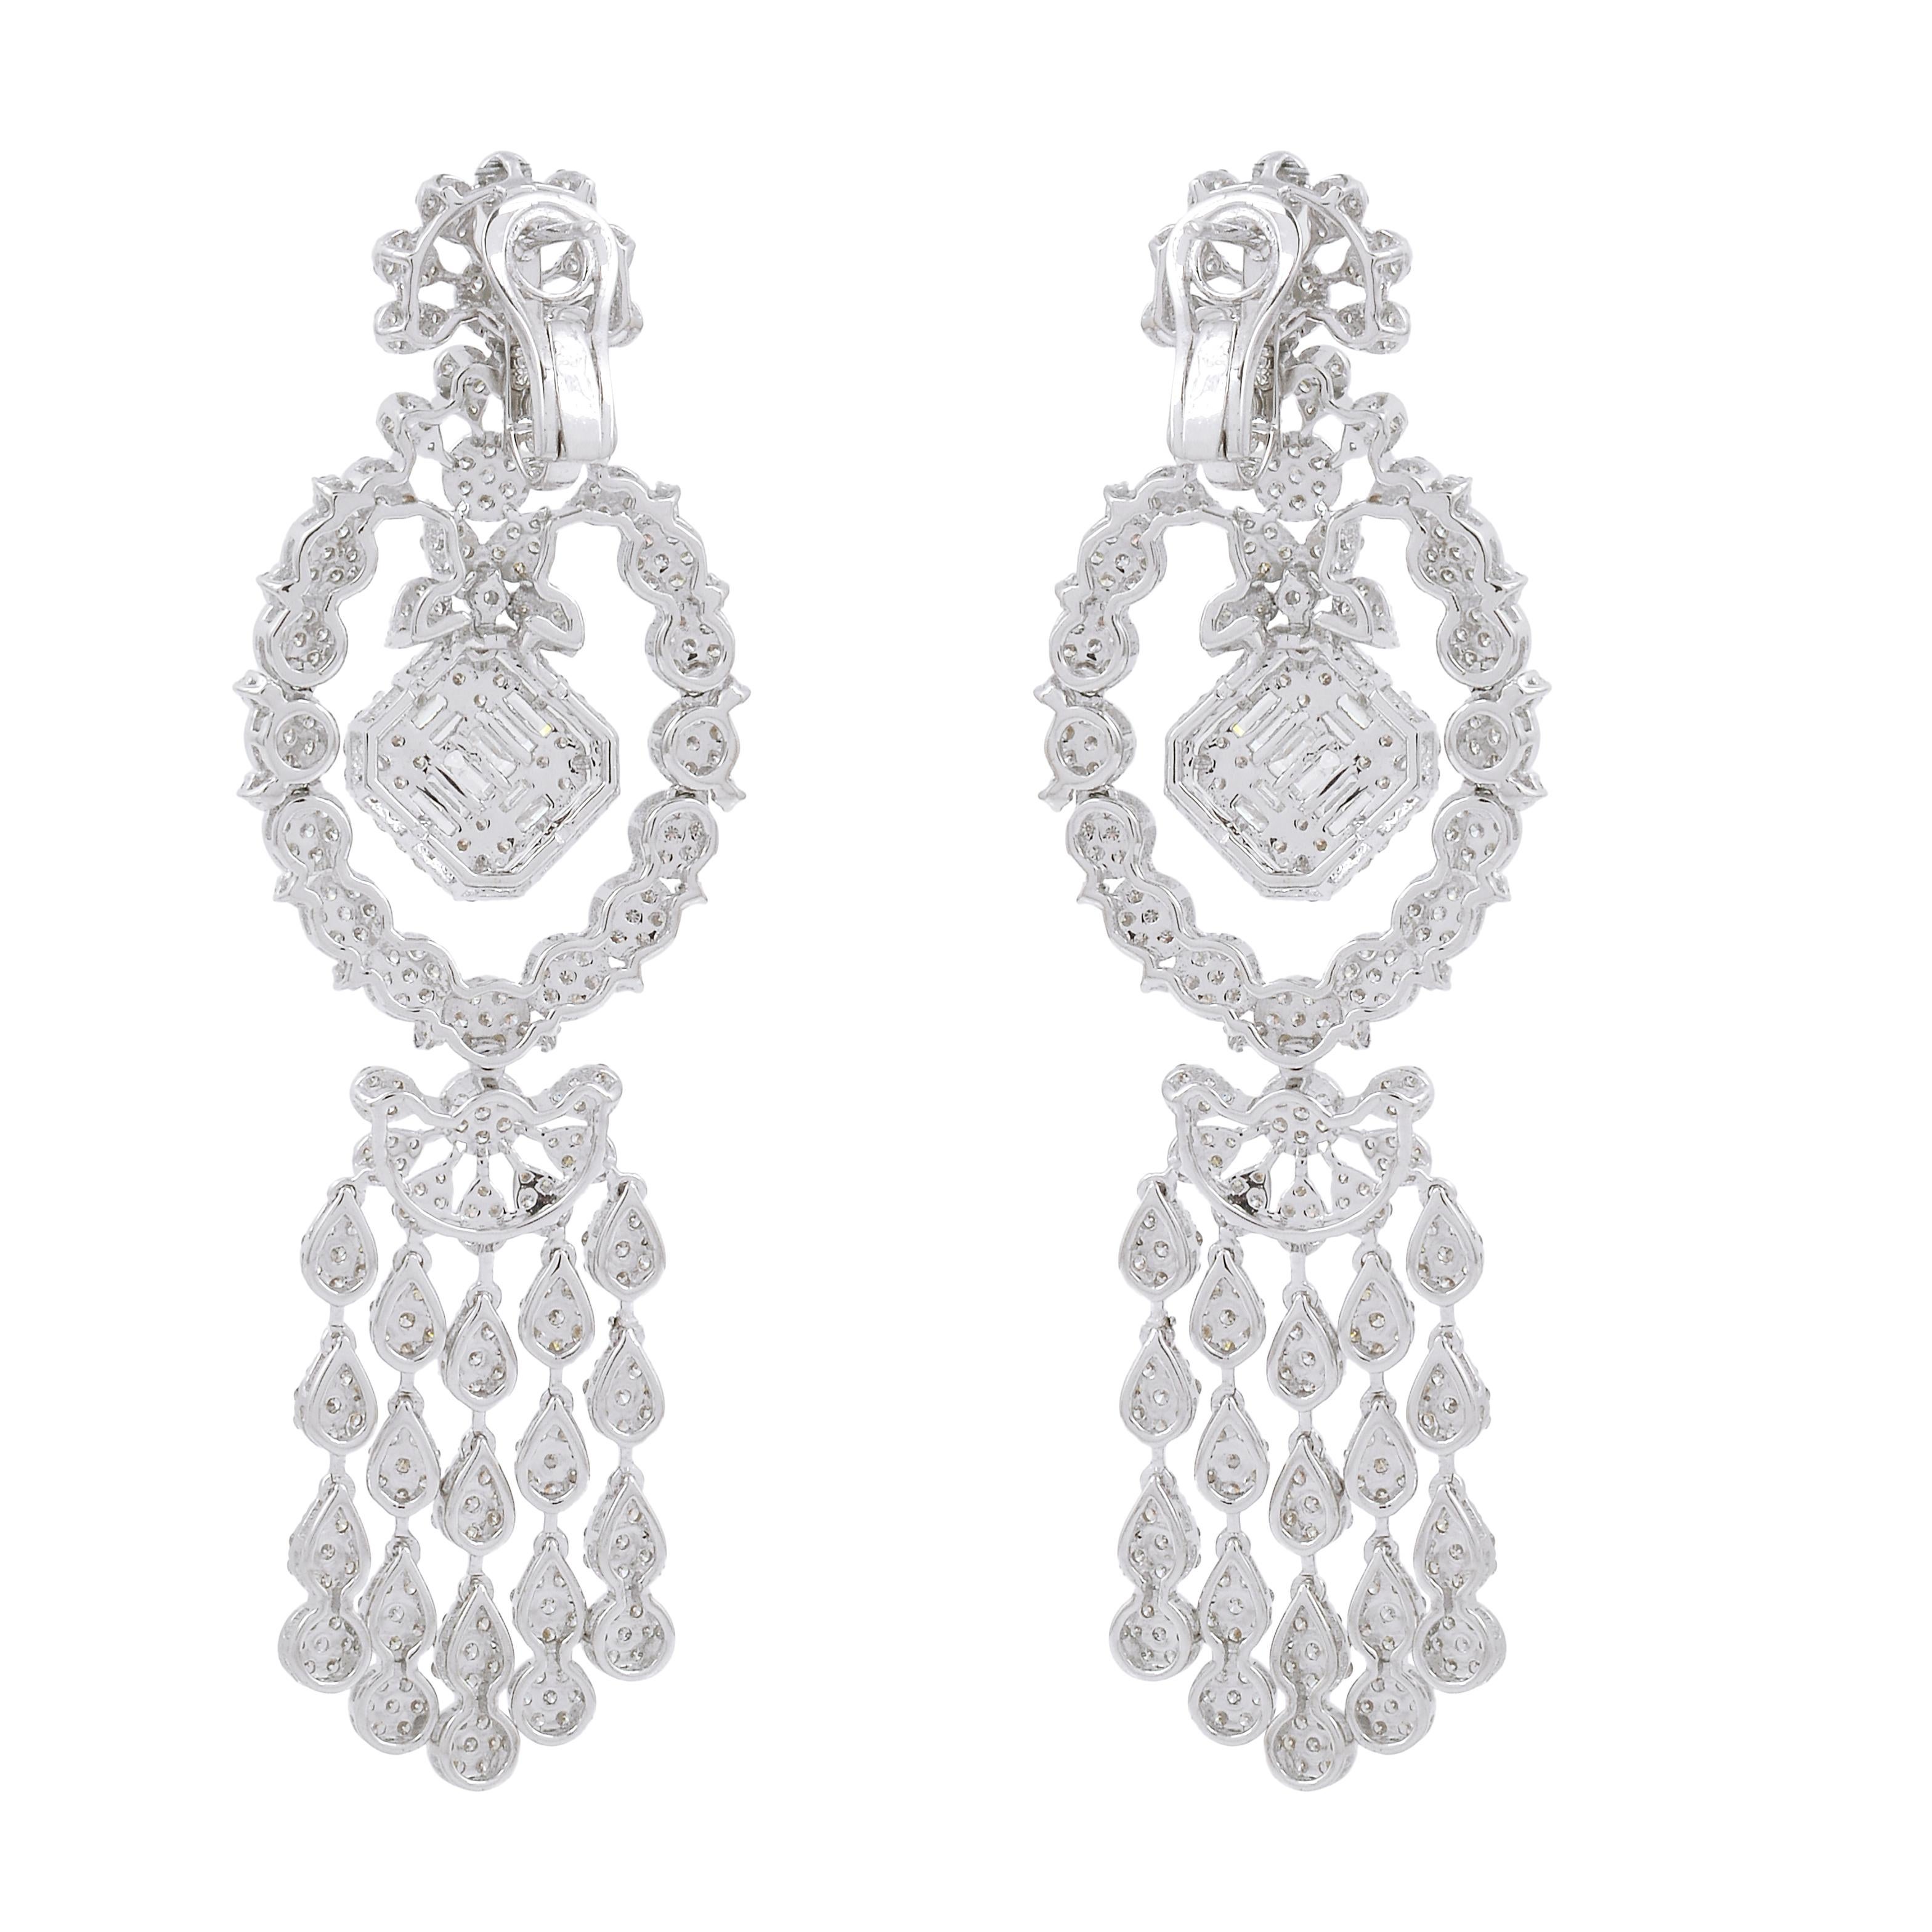 Each earring features a cluster of sparkling diamonds set in 18k solid gold, creating a brilliant and glamorous effect. The diamonds are carefully selected, ensuring that these earrings will shine brightly in any light. These earrings are available